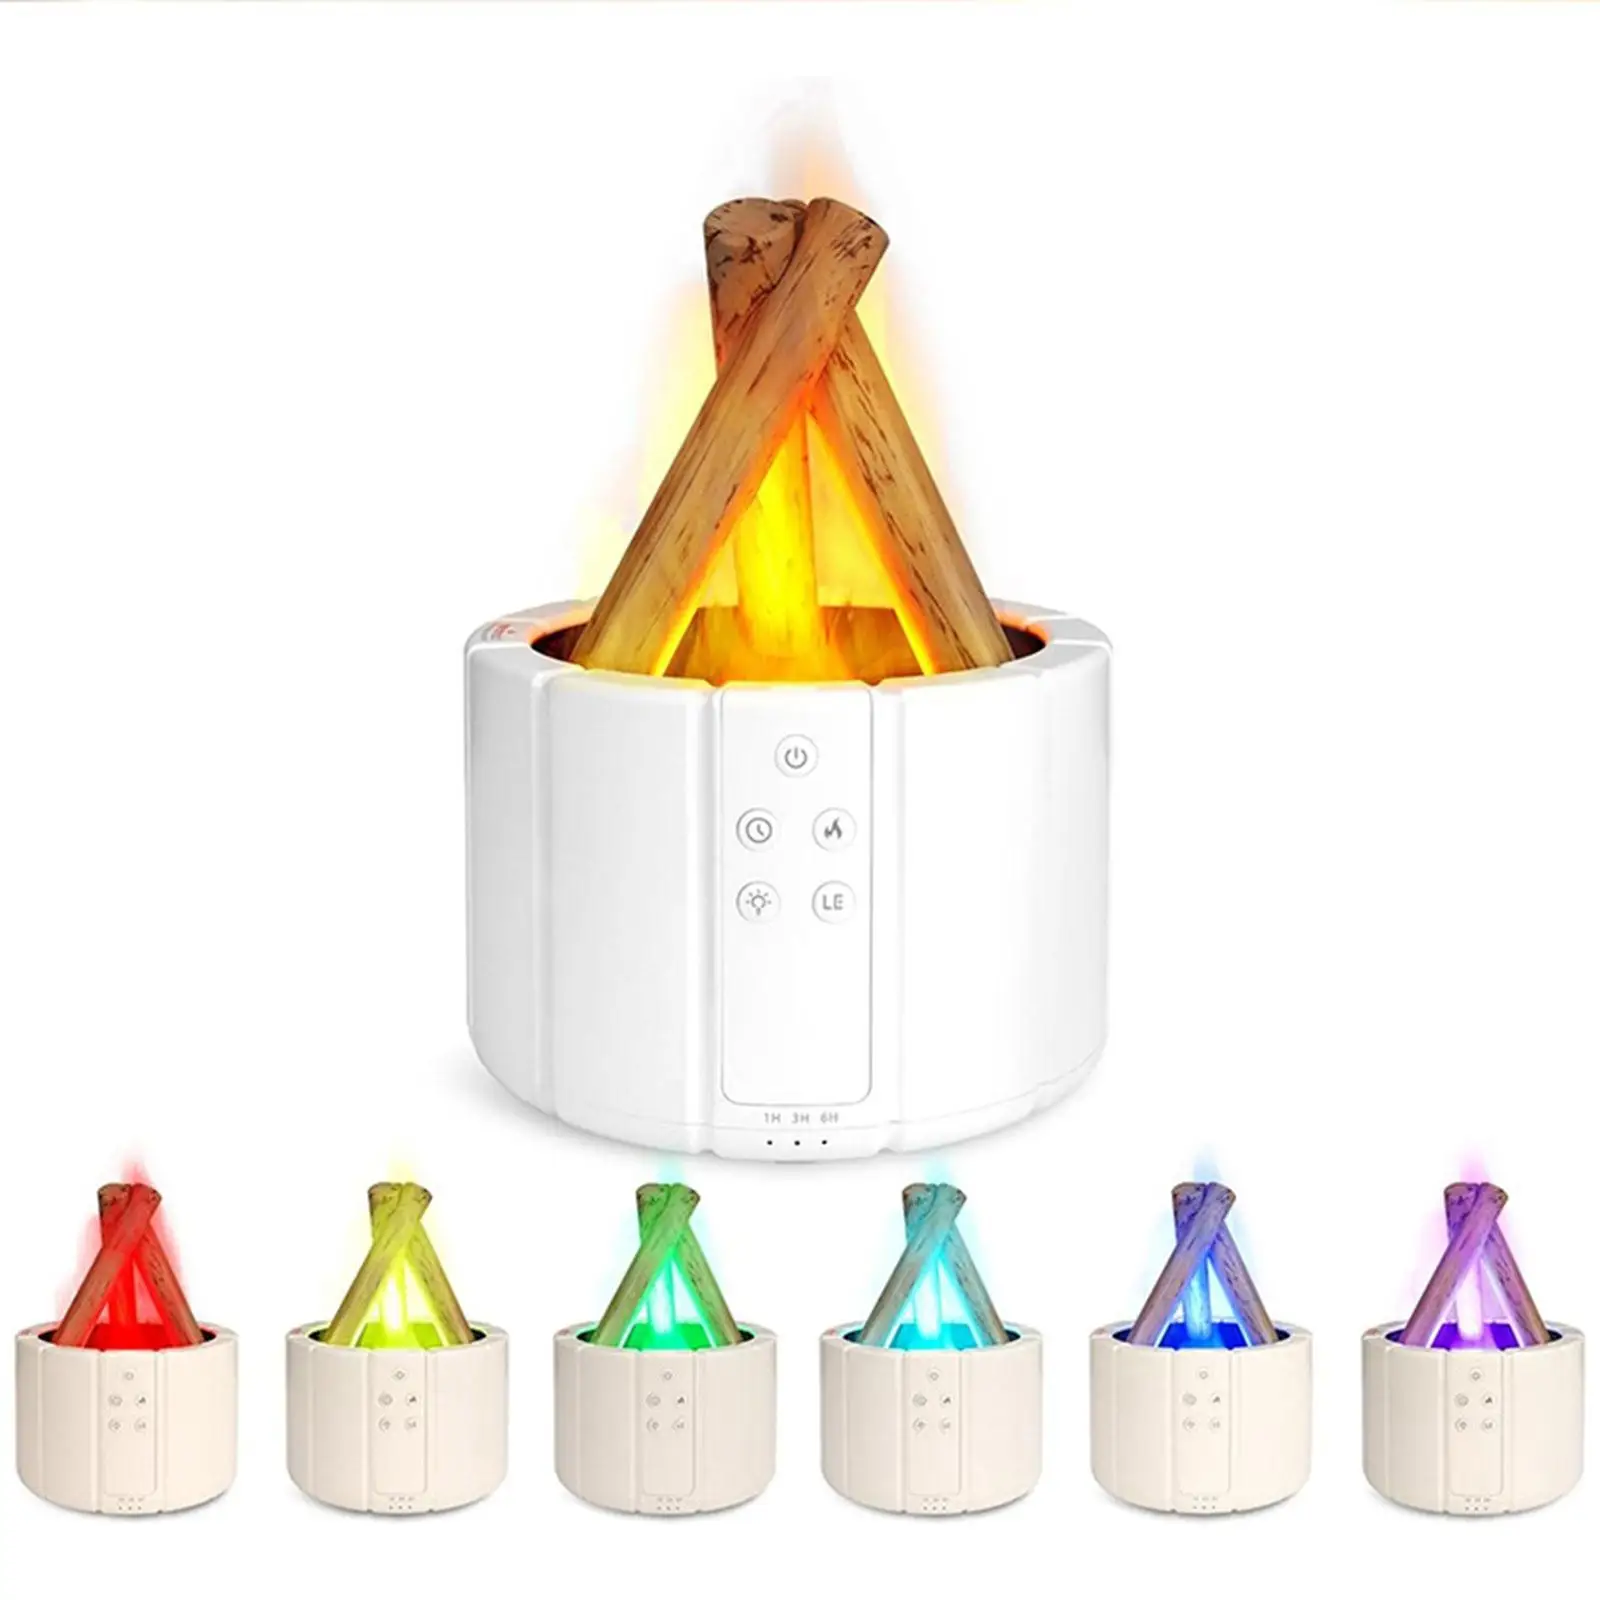 Essential Oil Diffuser 7 Color Simulation Flame Air Diffuser 250ml Air Humidifier for SPA Office Bedroom Living Room Large Room 